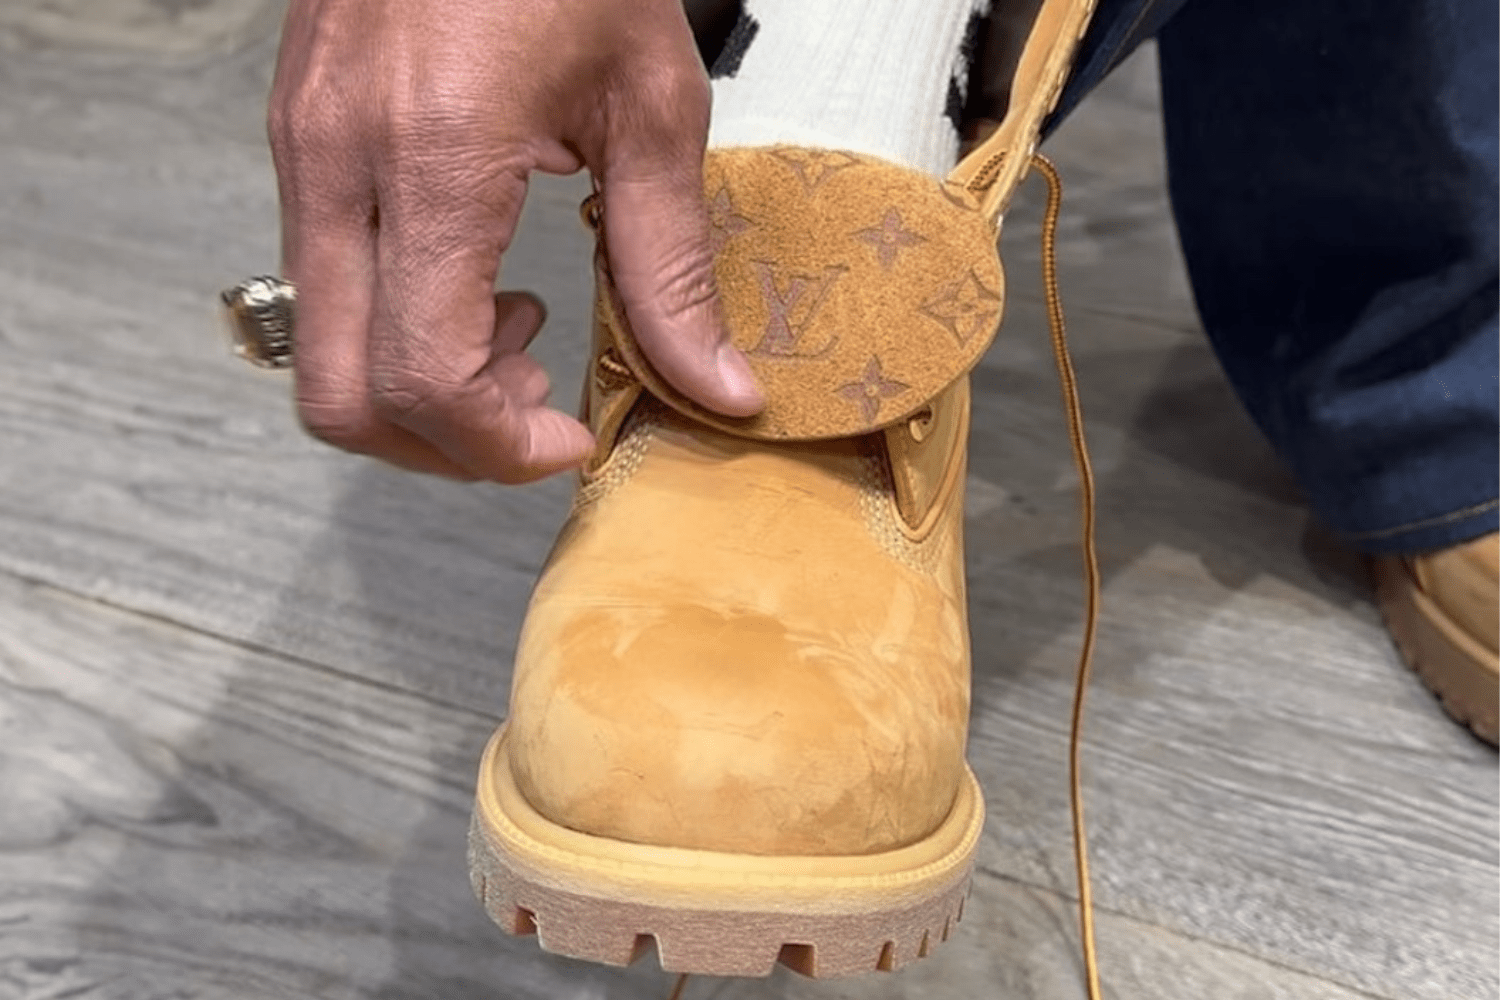 Pharrell Williams reveals the Louis Vuitton x Timberland 6-Inch Boot